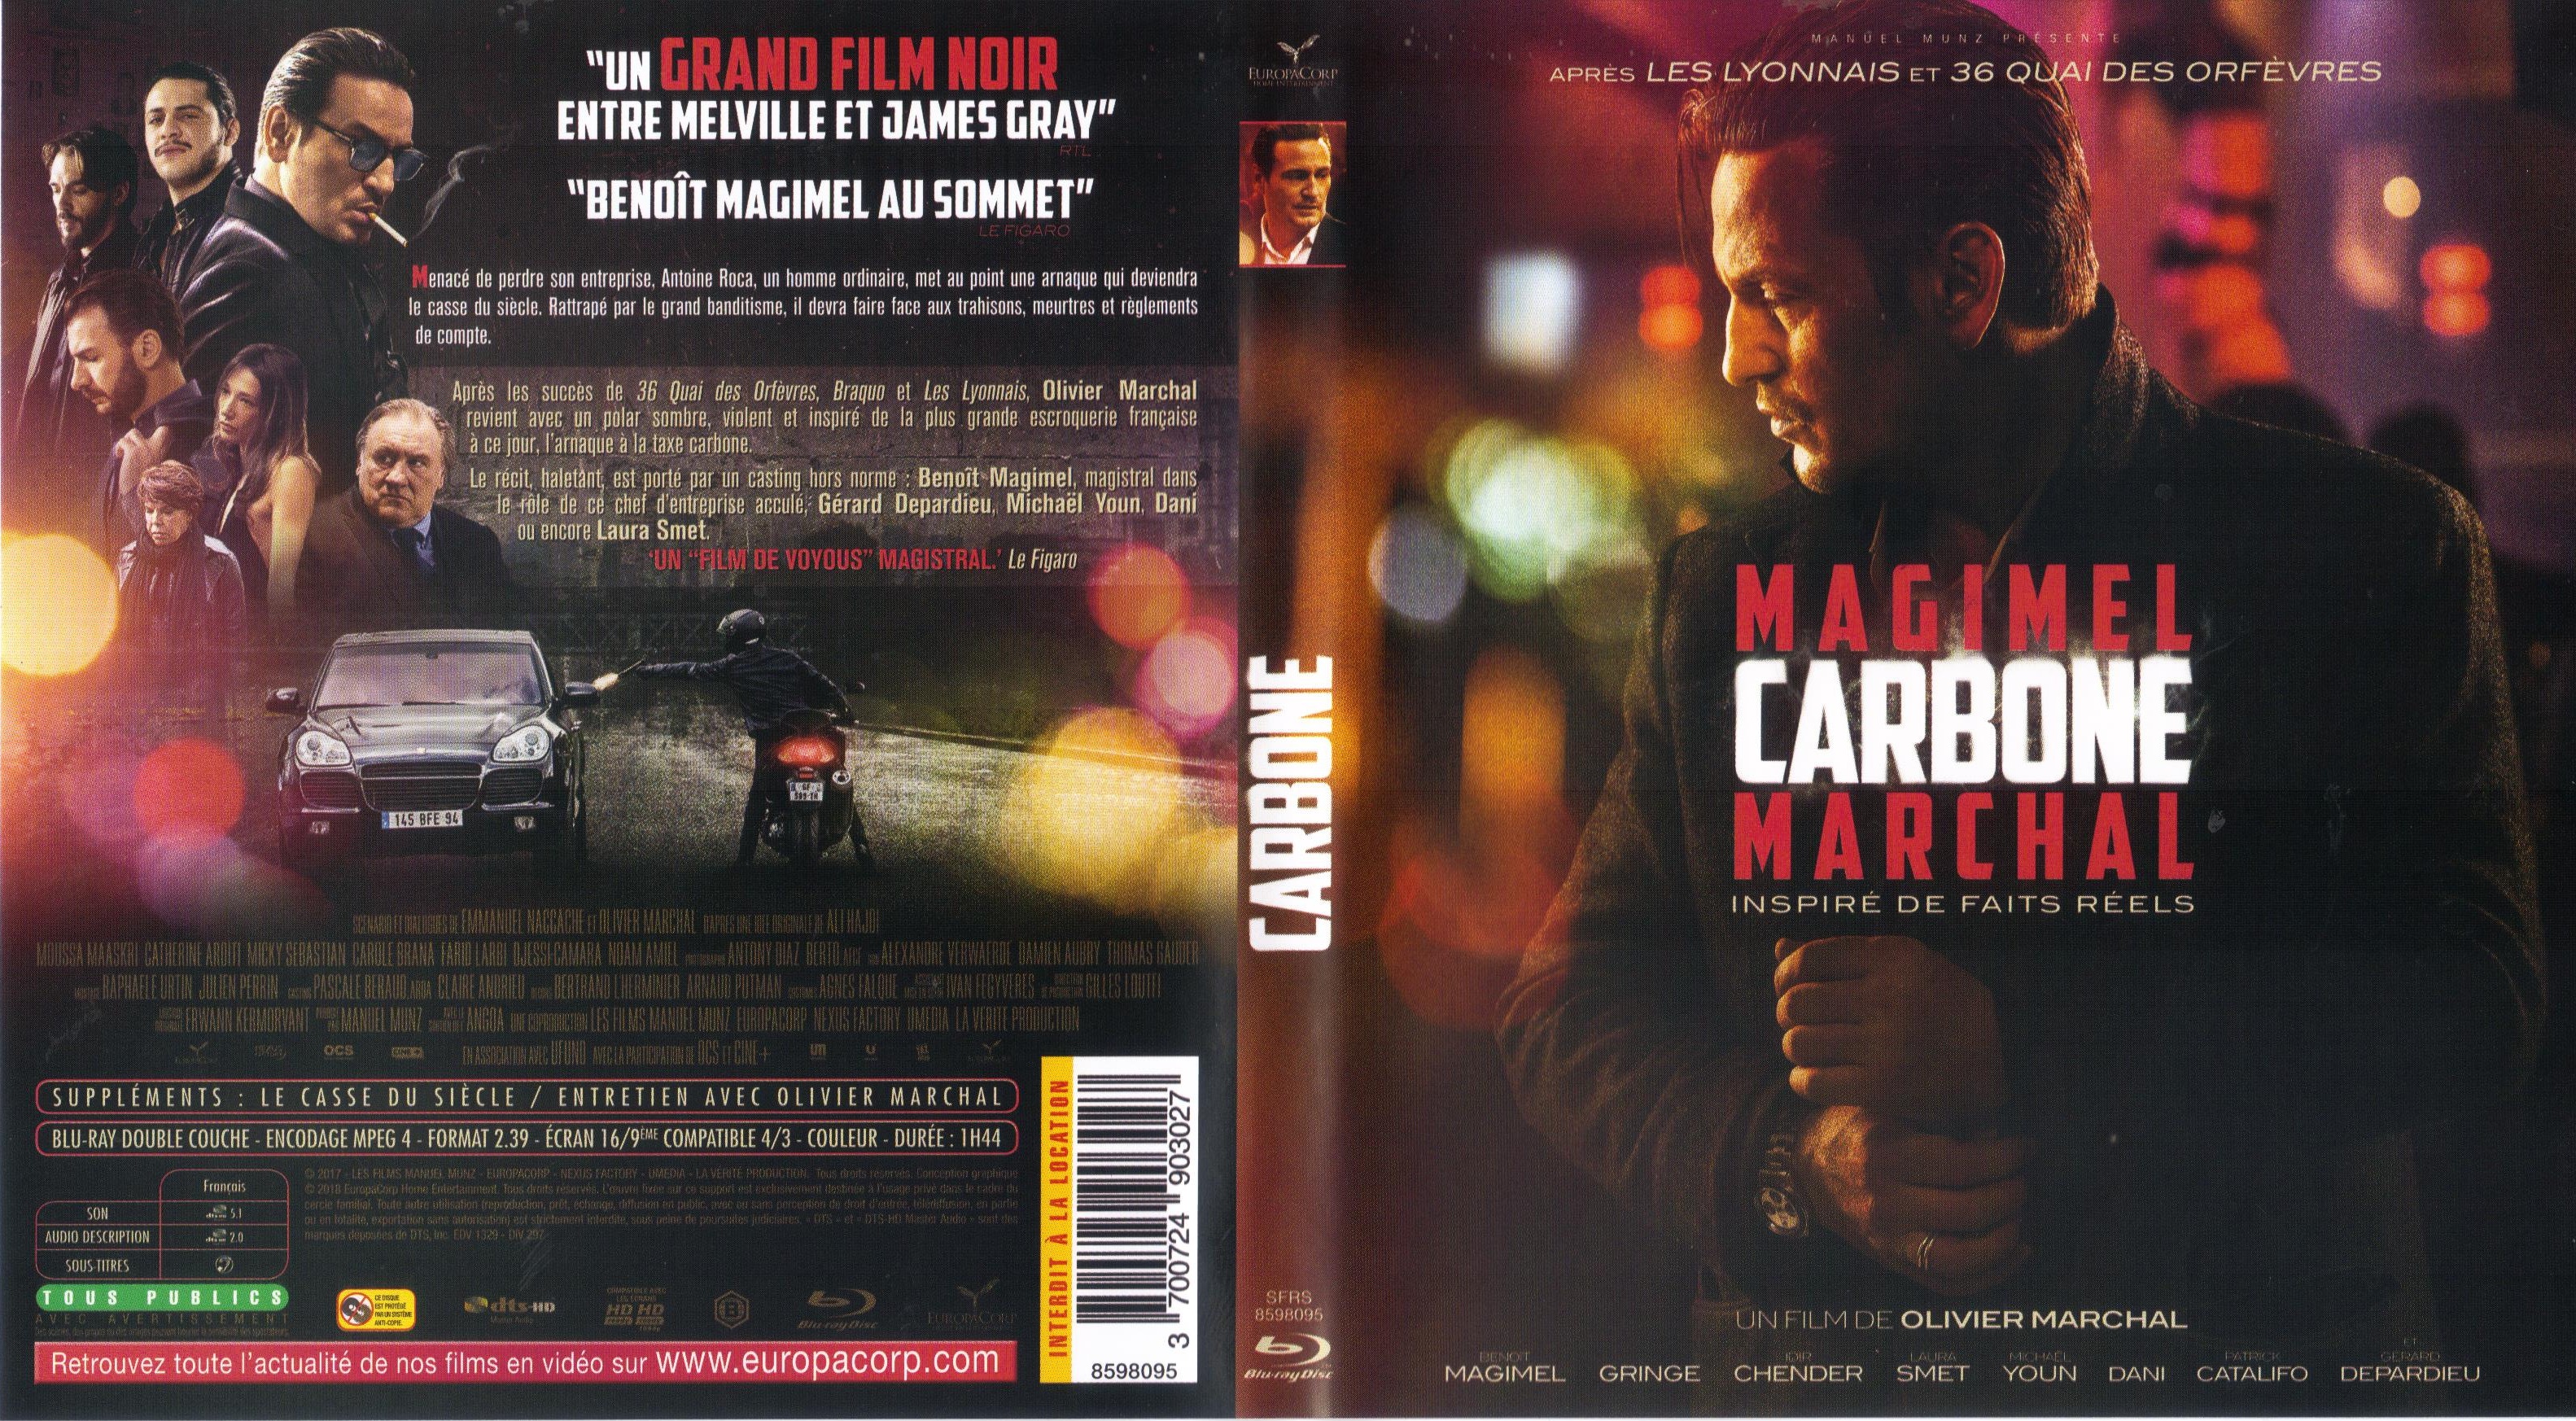 Jaquette DVD Carbone (BLU-RAY)